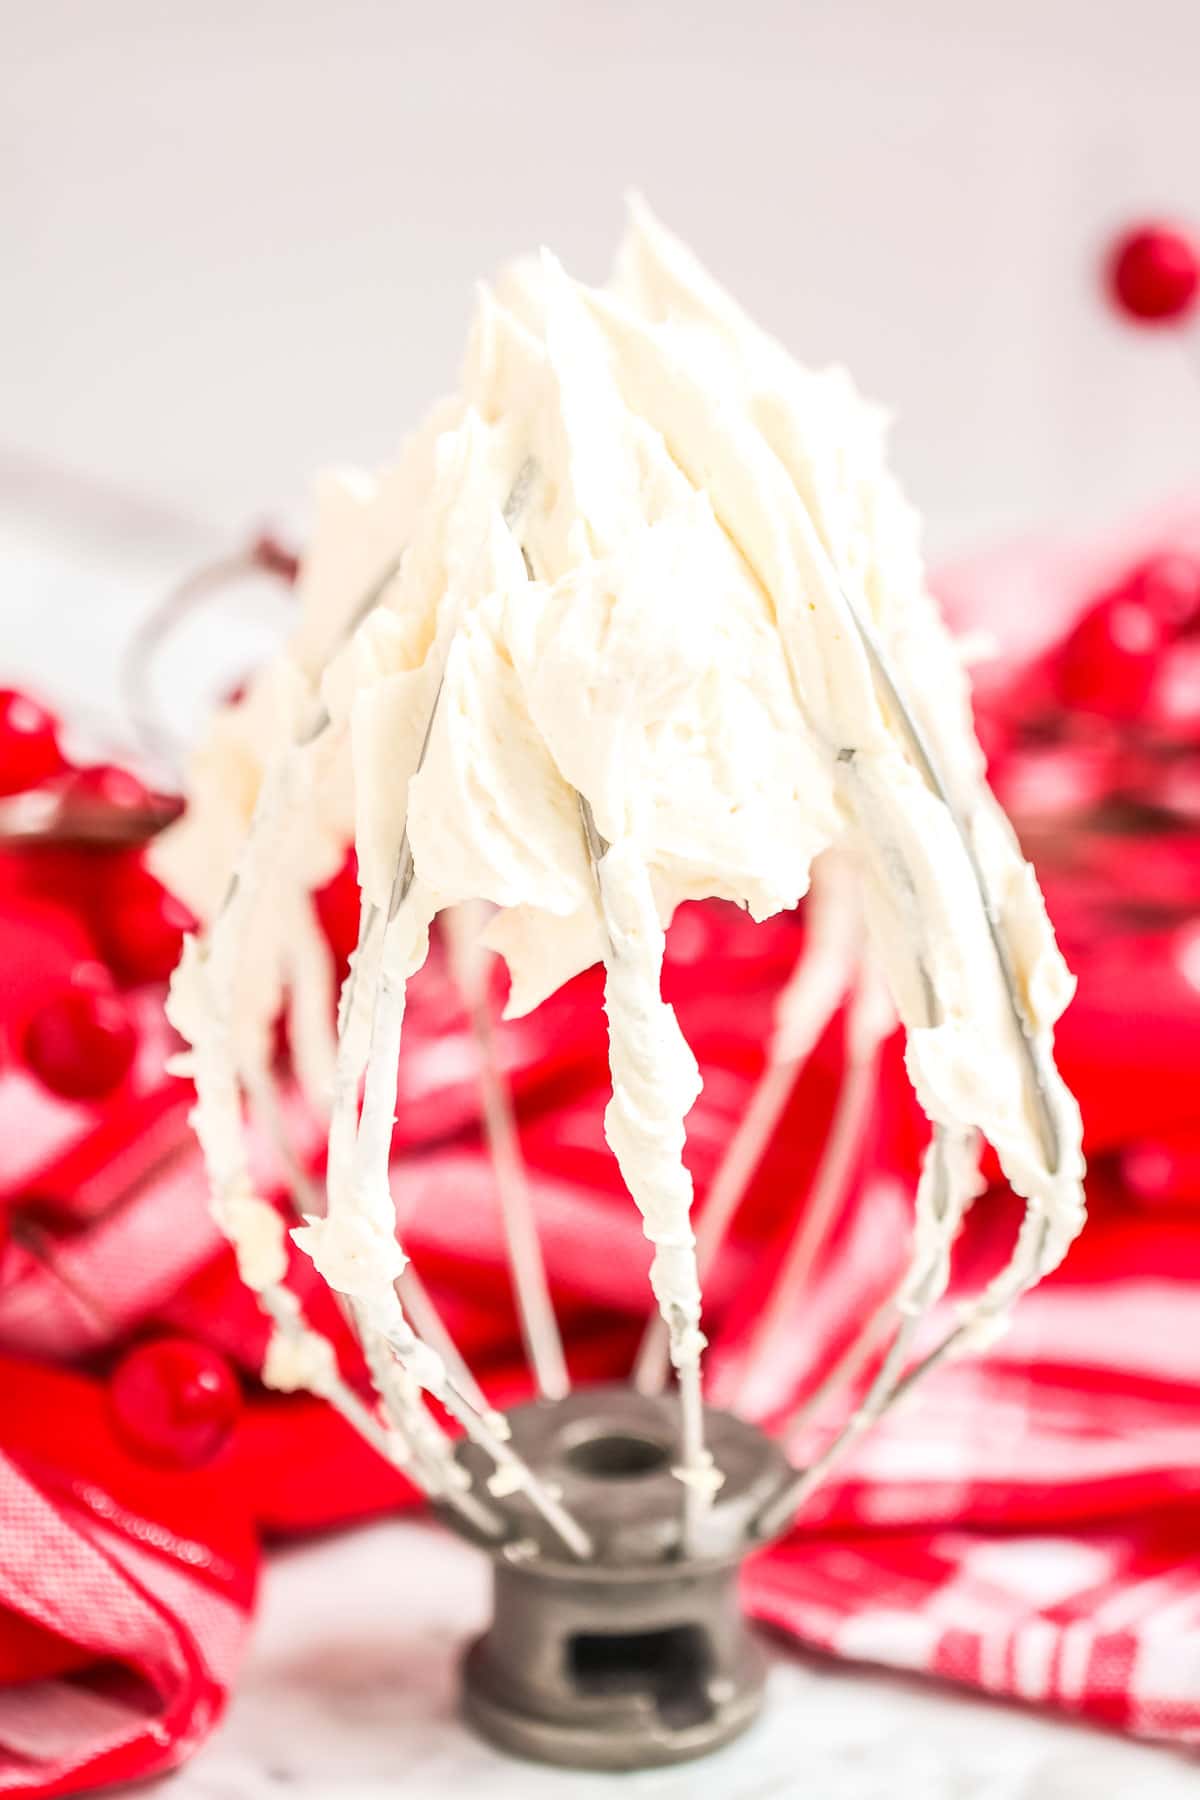 a whisk covered with buttercream standing upright in front of a red kitchen towel